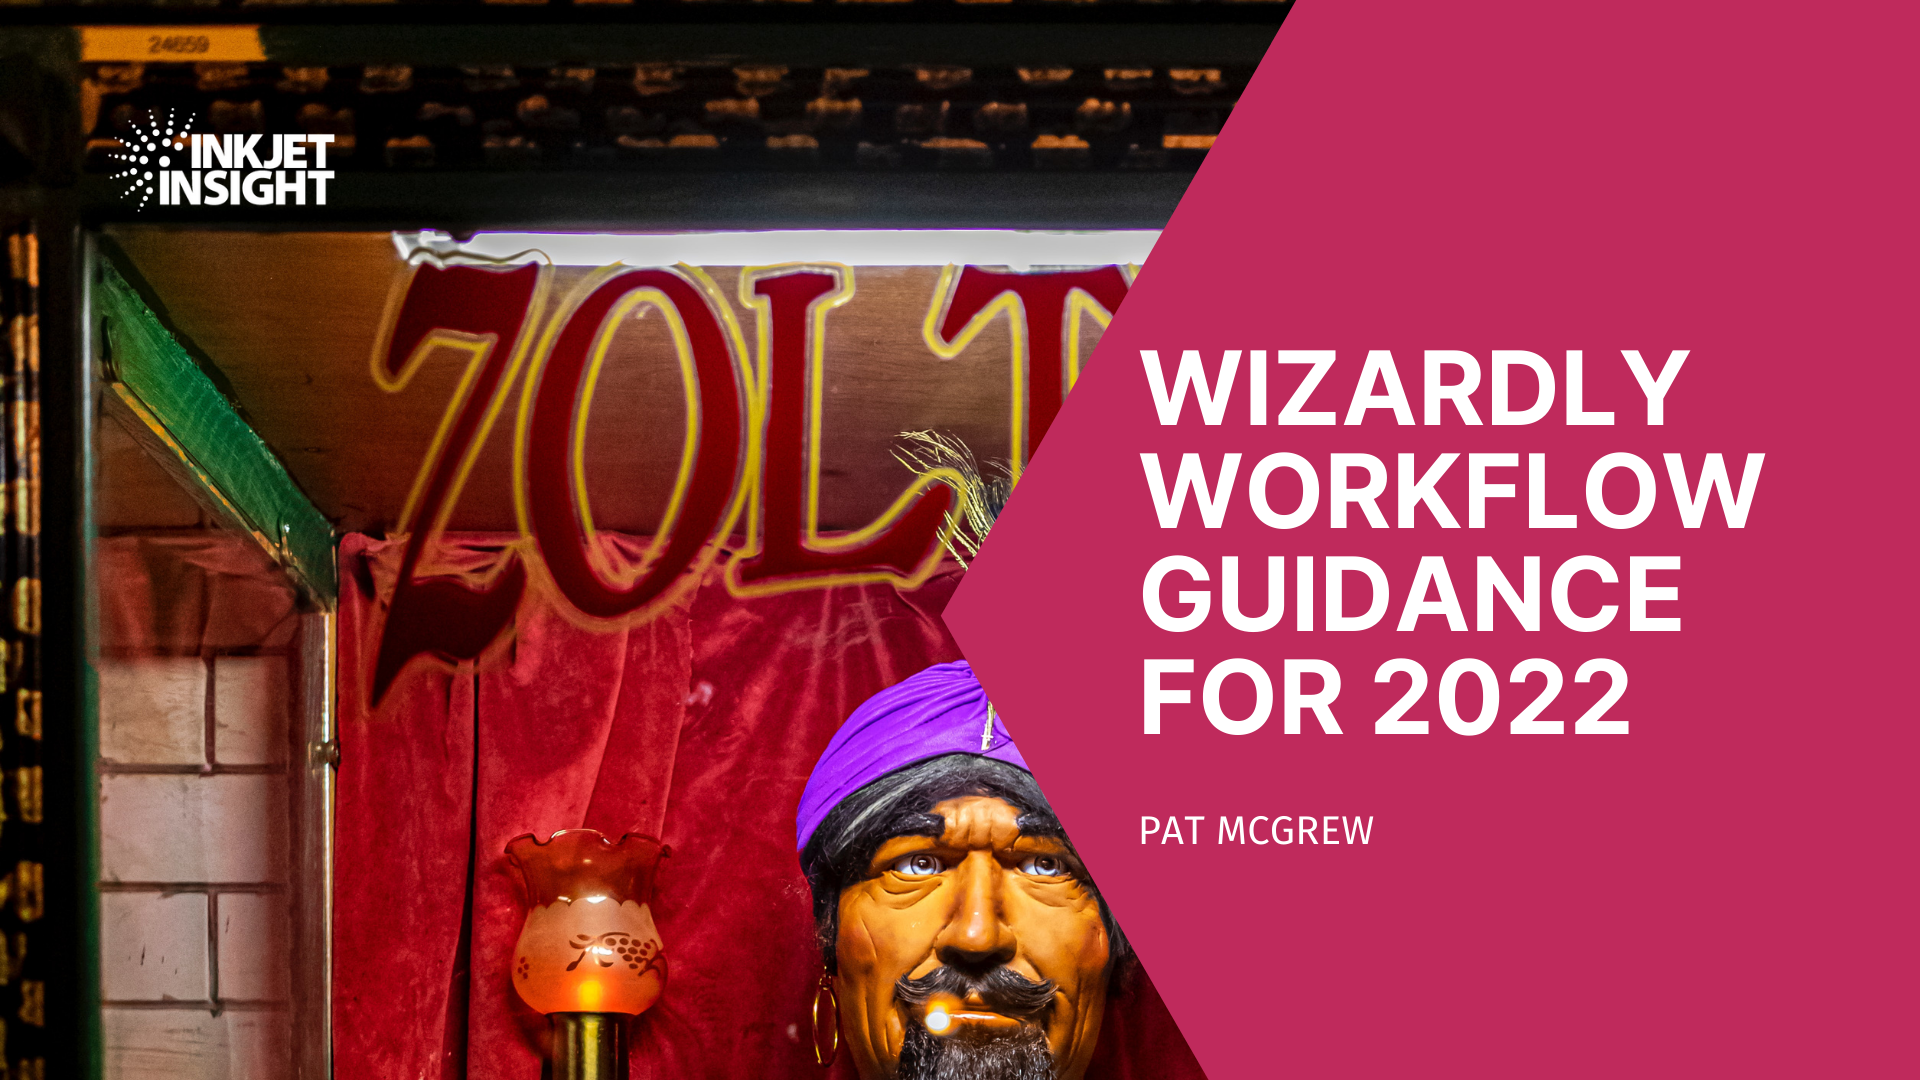 Featured image for “Wizardly Workflow Guidance for 2022”